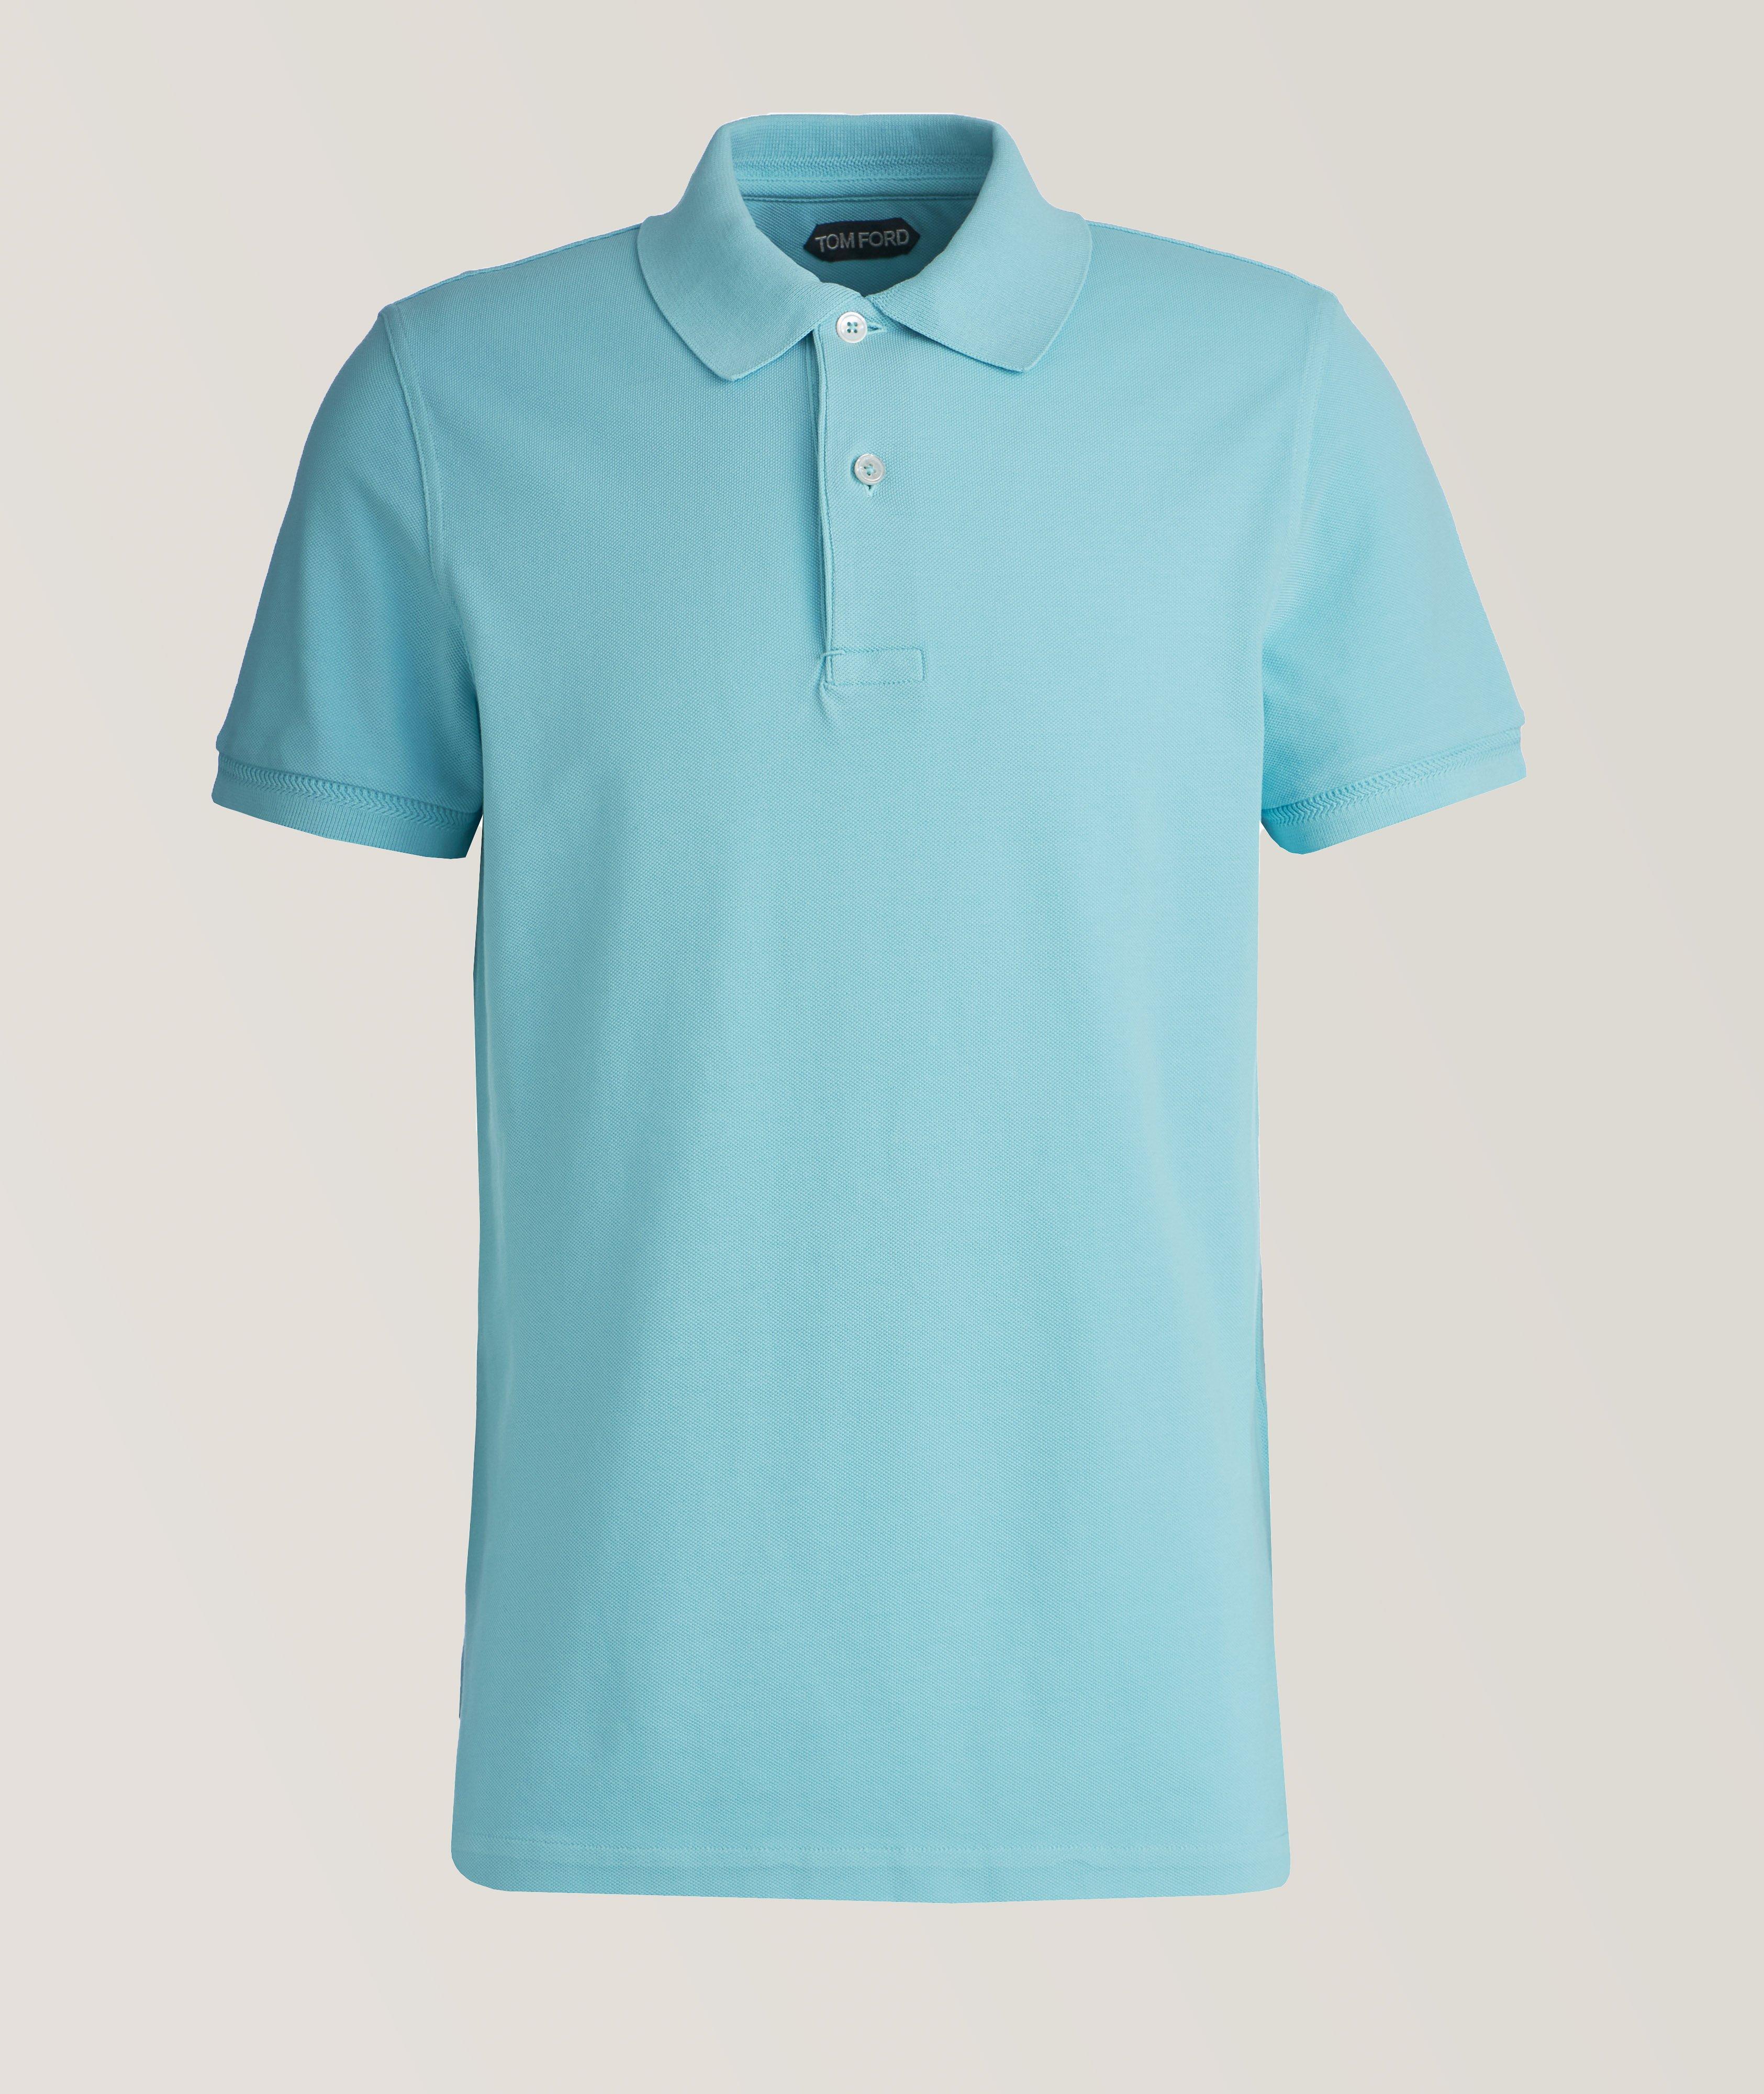 TOM FORD Textured Cotton Polo